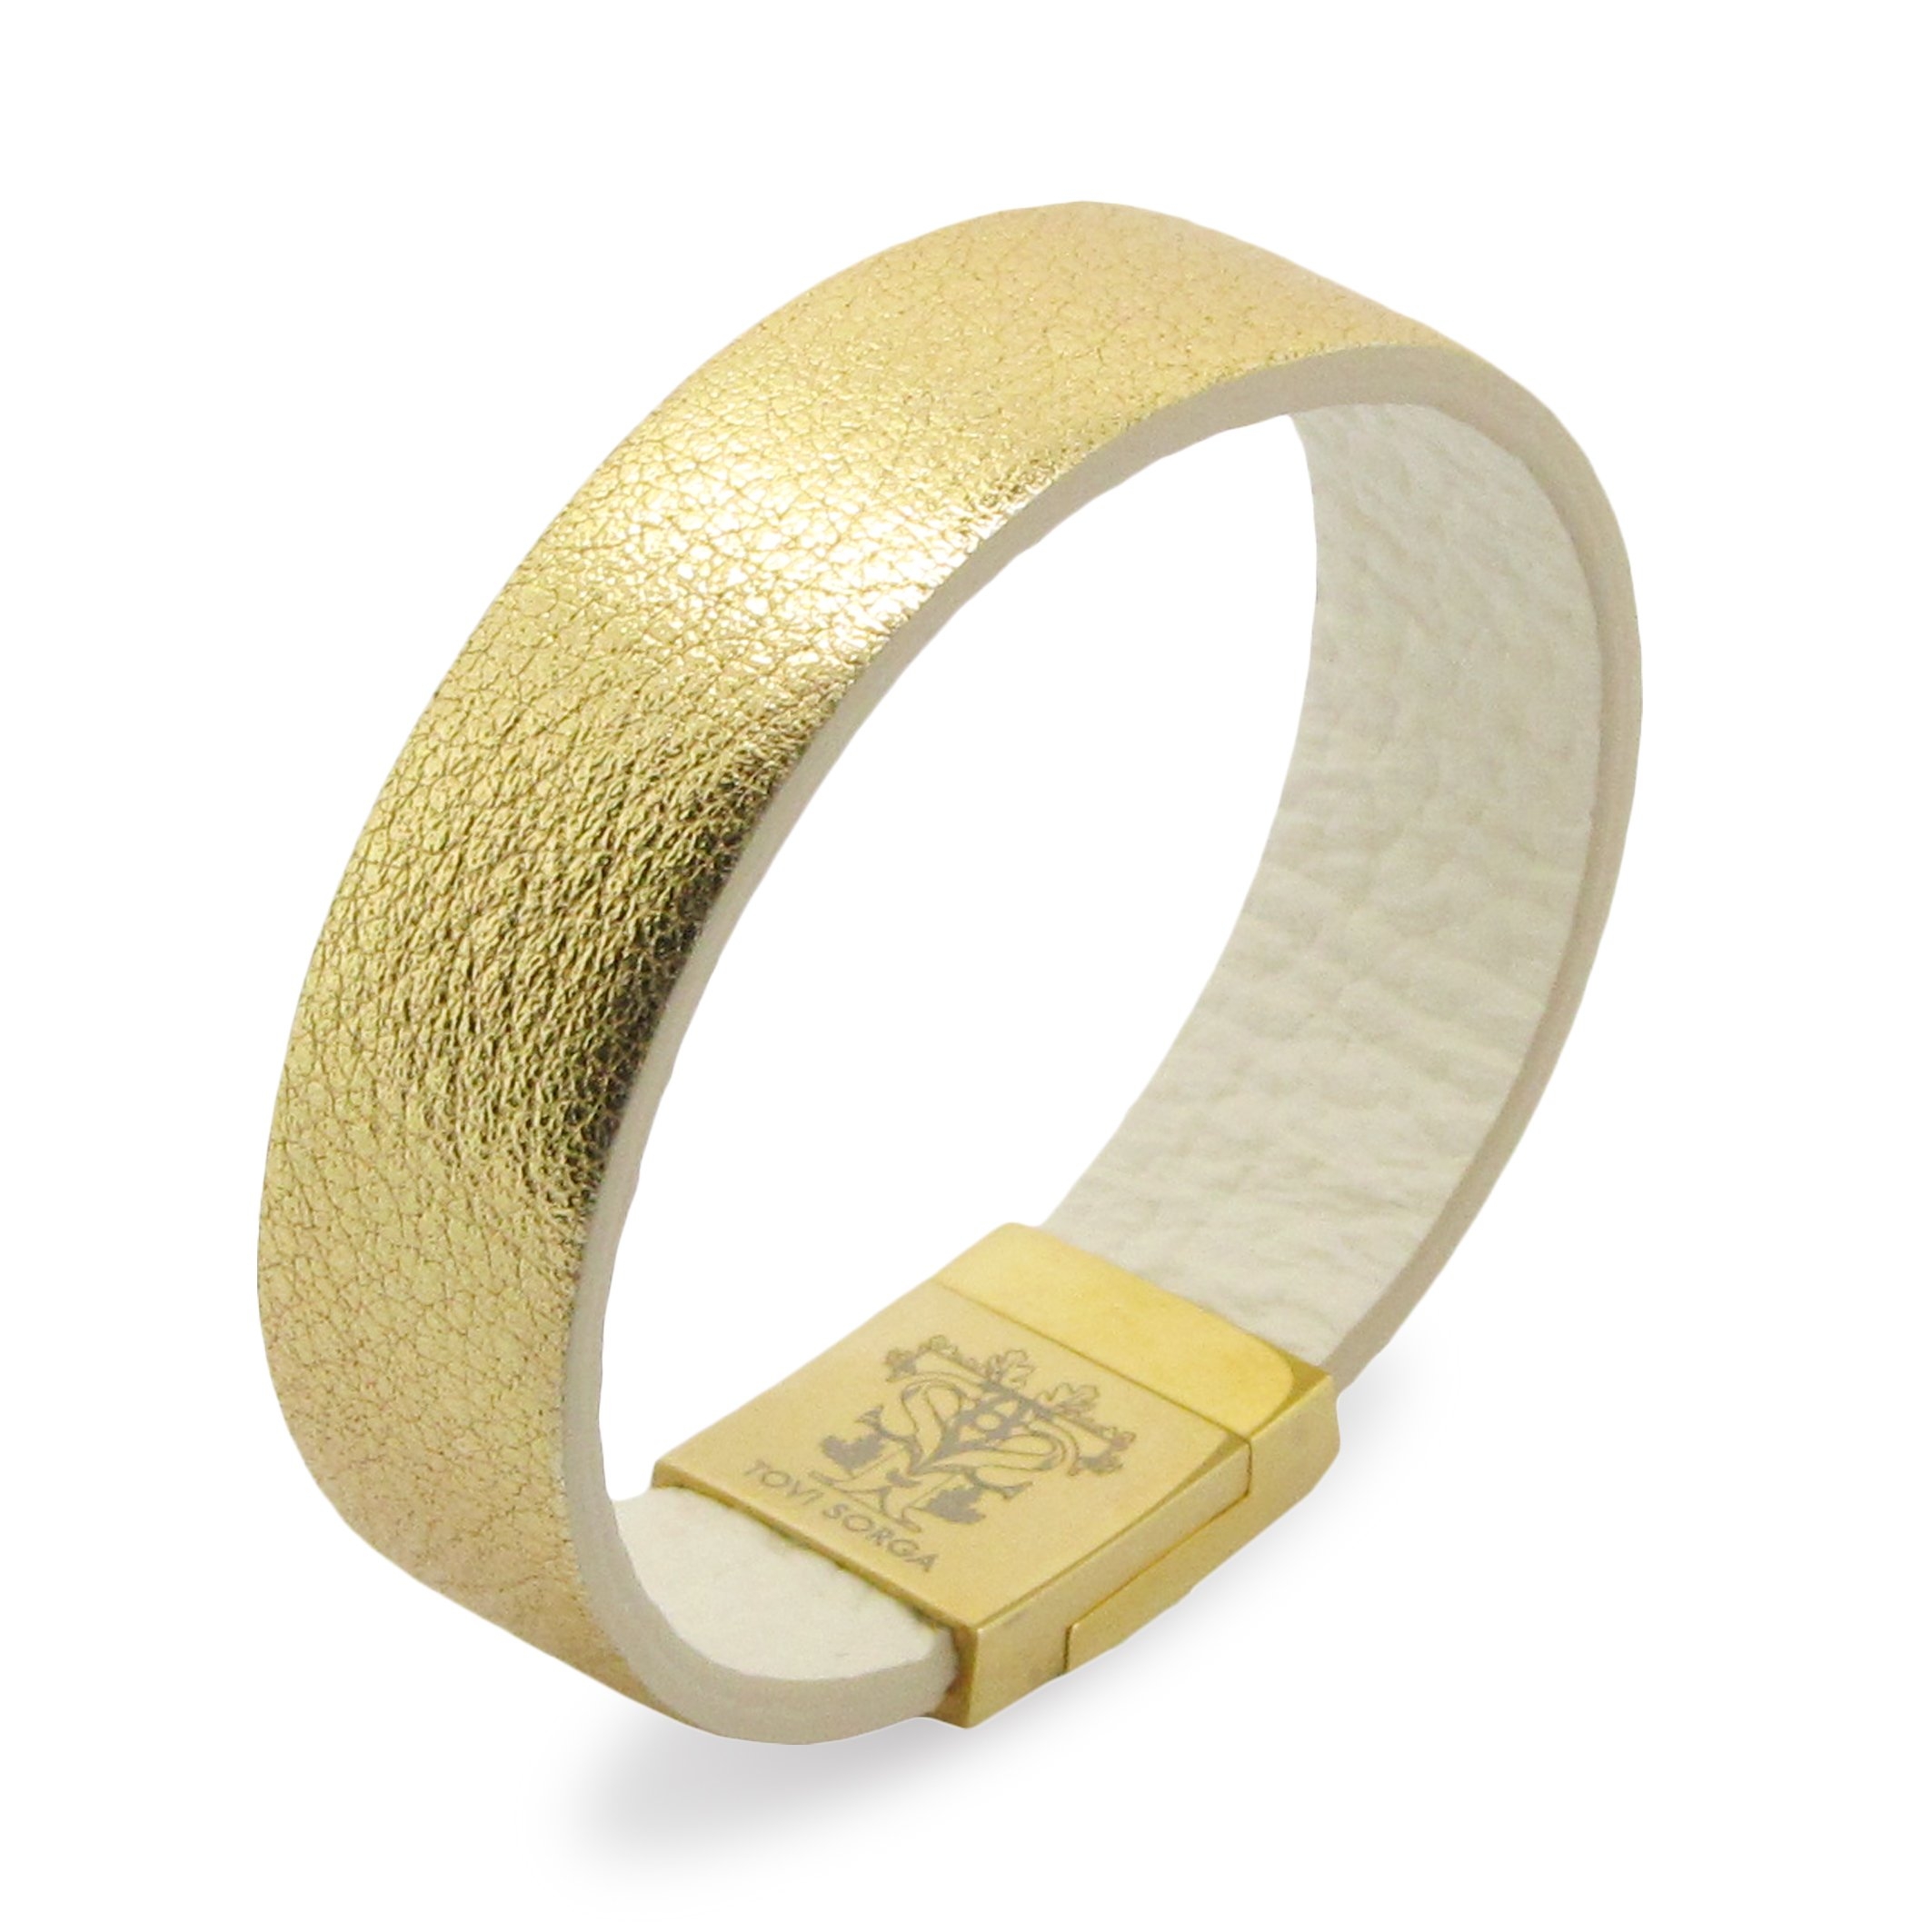 Leather Contactless Payment Bracelet: Plain Metallic Gold / Rose Gold – Extra-Small / Gold